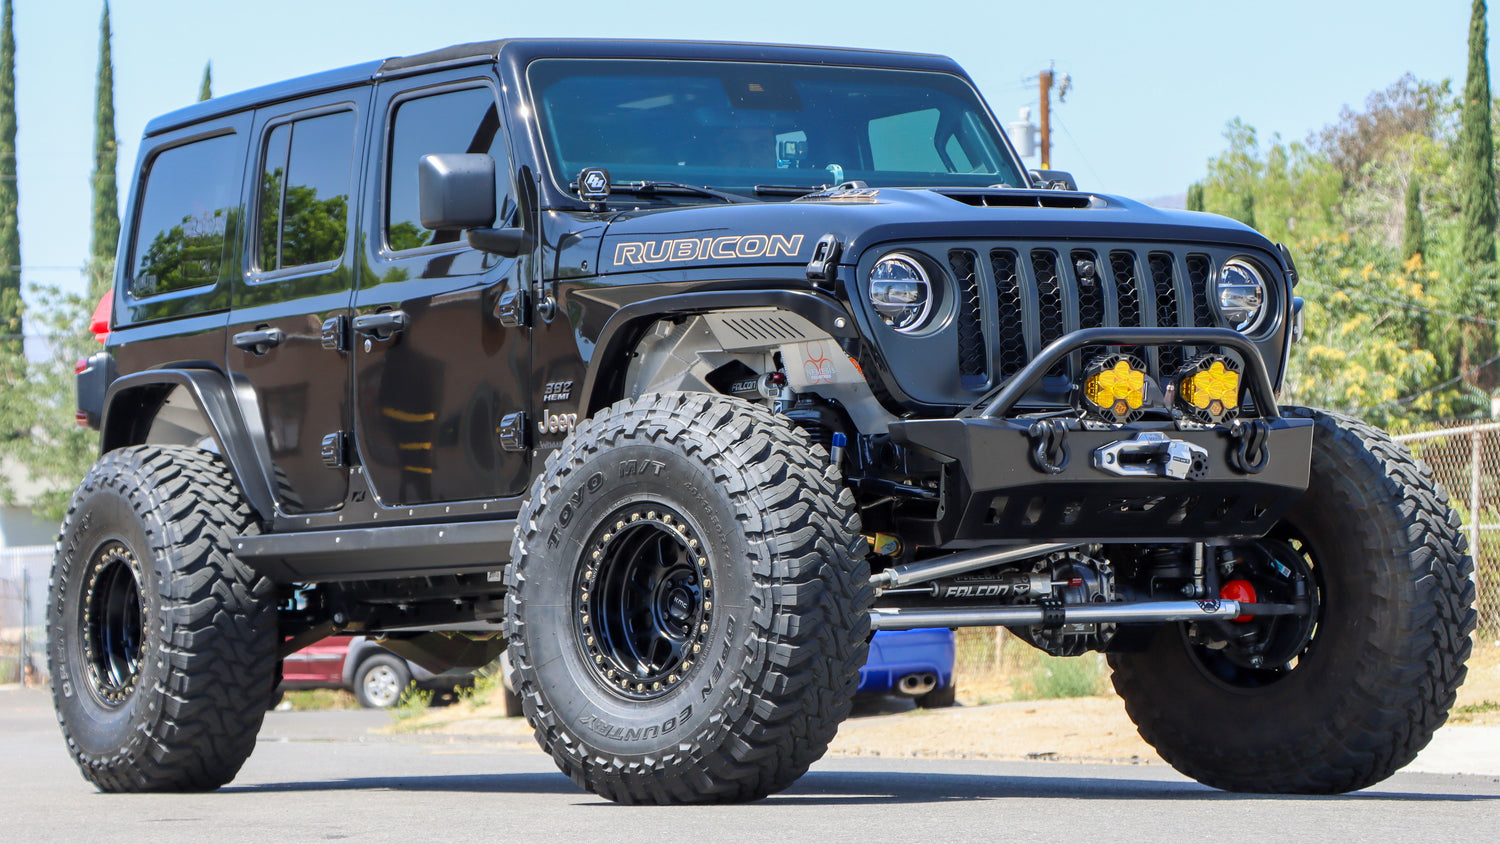 Black 2020 Jeep Wrangler Rubicon lifted with 37x12.50r17LT Toyo Open Country M/T Tires with KMC Grenade Bead lock wheels in a matte black finish.